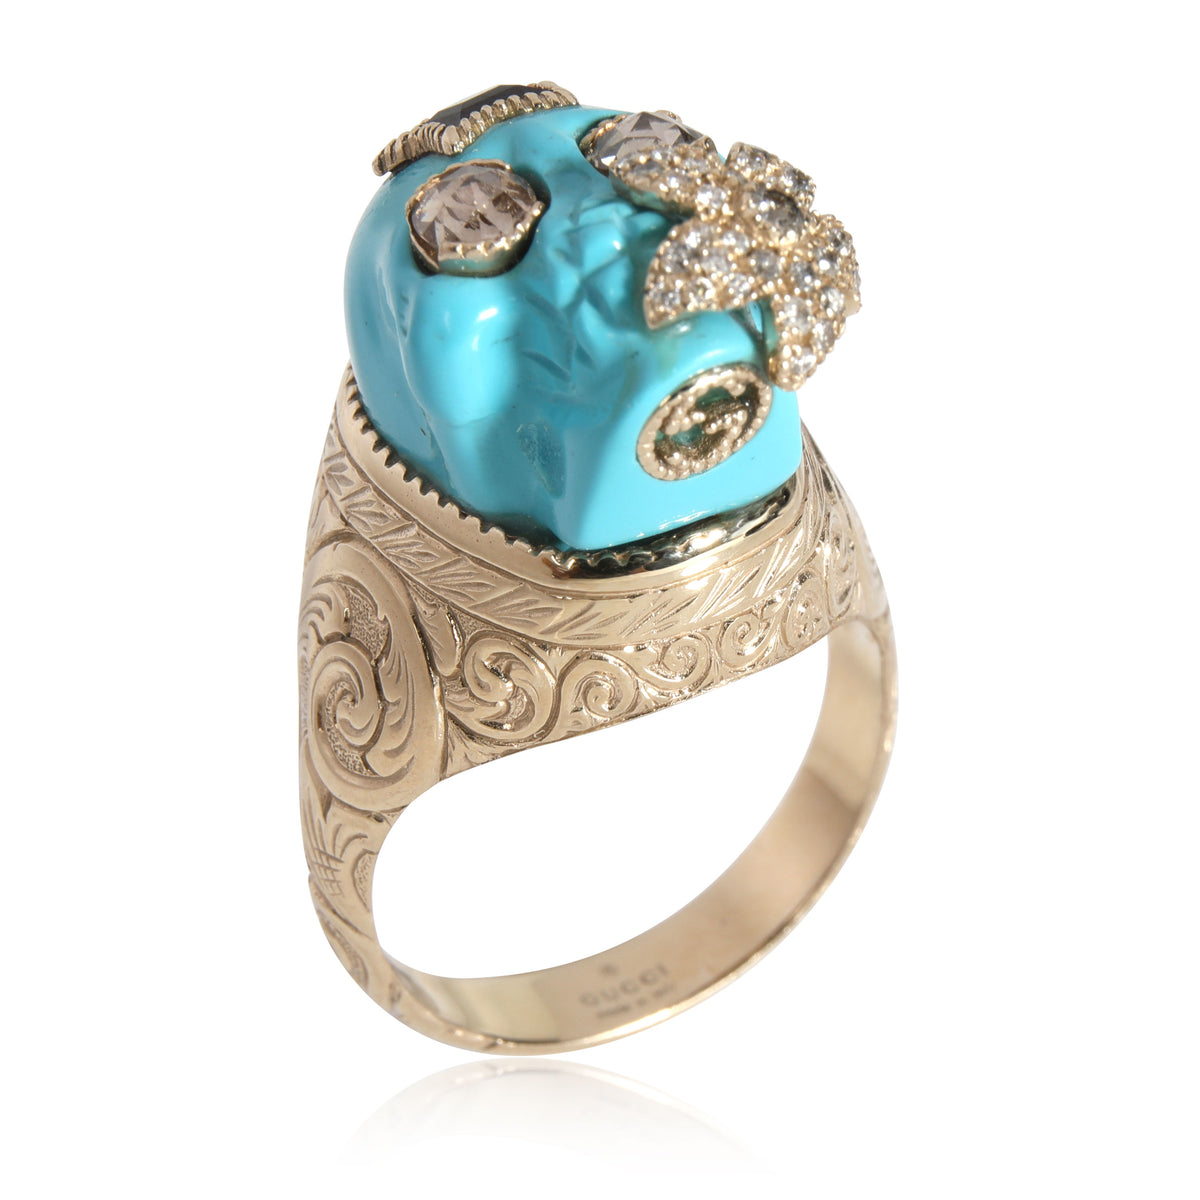 Gucci Turquoise Skull Ring with Rose Cut Diamond Eyes in 18K Yellow Gold